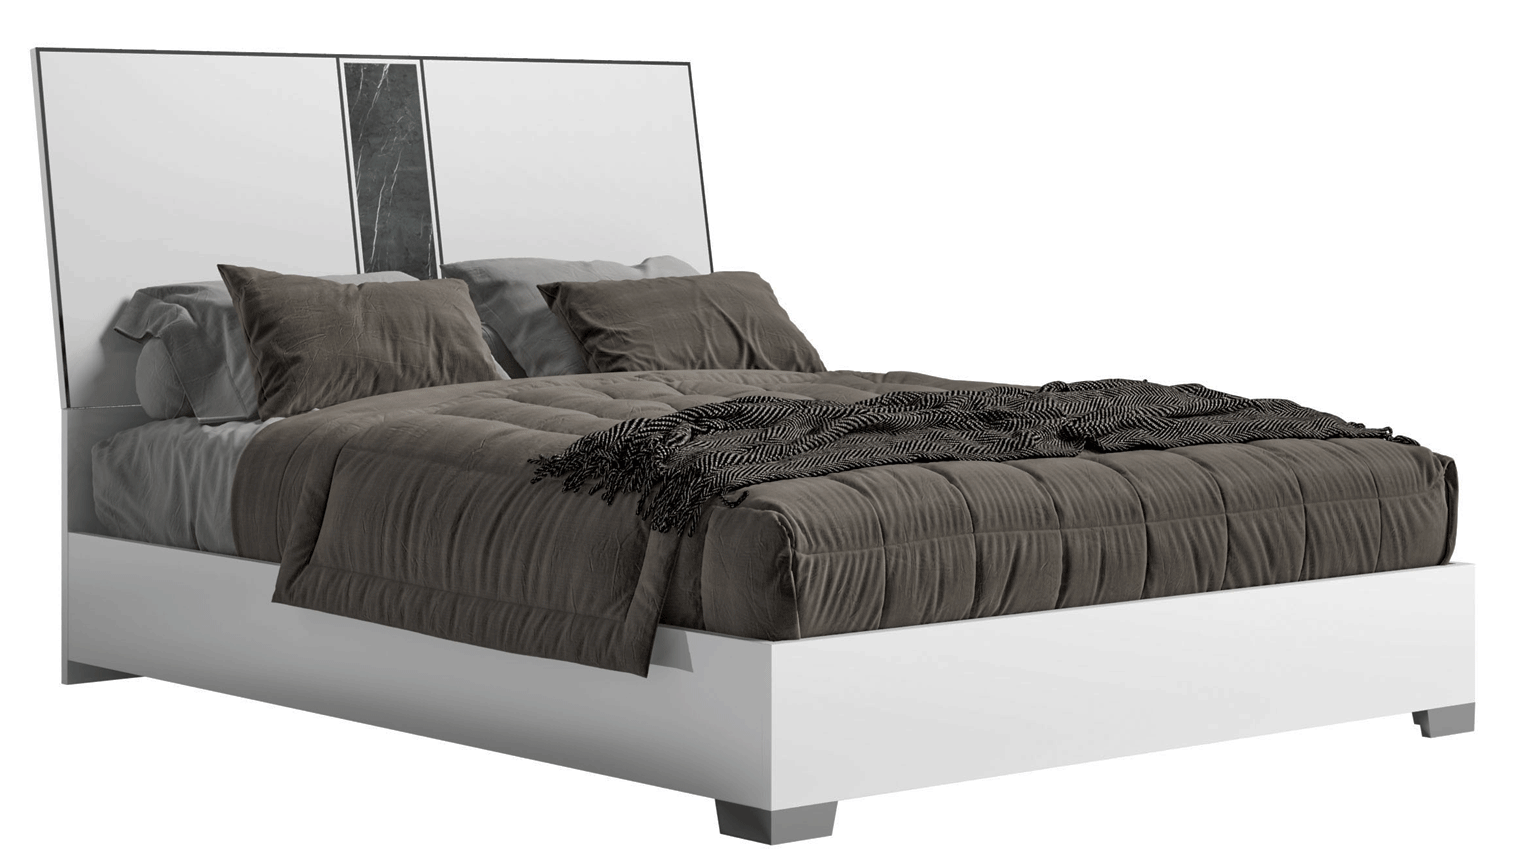 Bedroom Furniture Mirrors Bianca Marble Bed